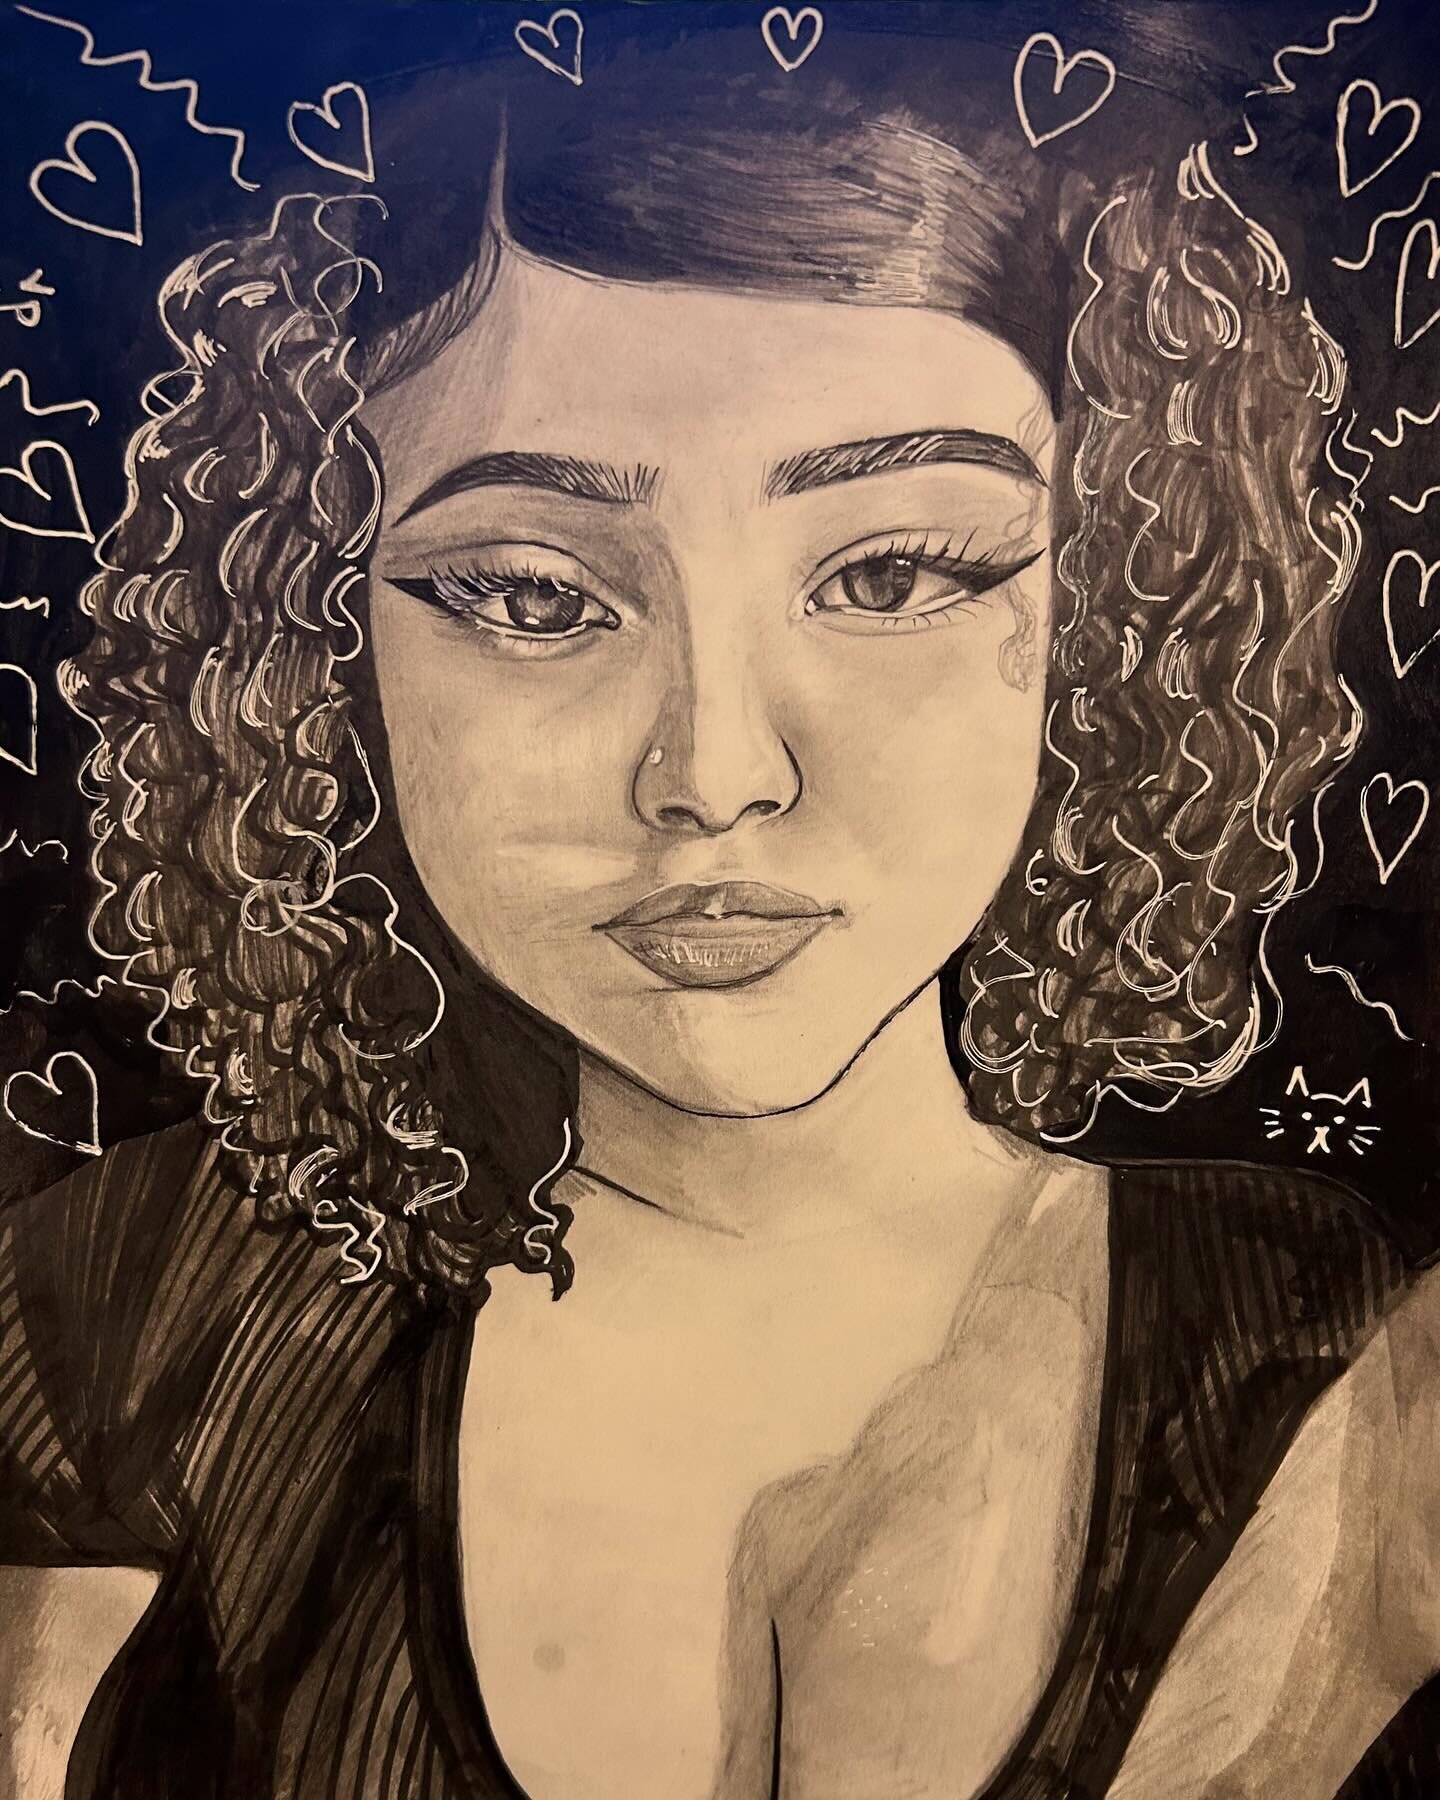 &ldquo;Lit Face Assignment&rdquo; by Jayden Amaral (@jaebaearts) in grade 12. Done in pencil, gel pens, microns and acrylic paint.

#mayfieldvisualarts #art #artist #drawing #visualarts #mayfield